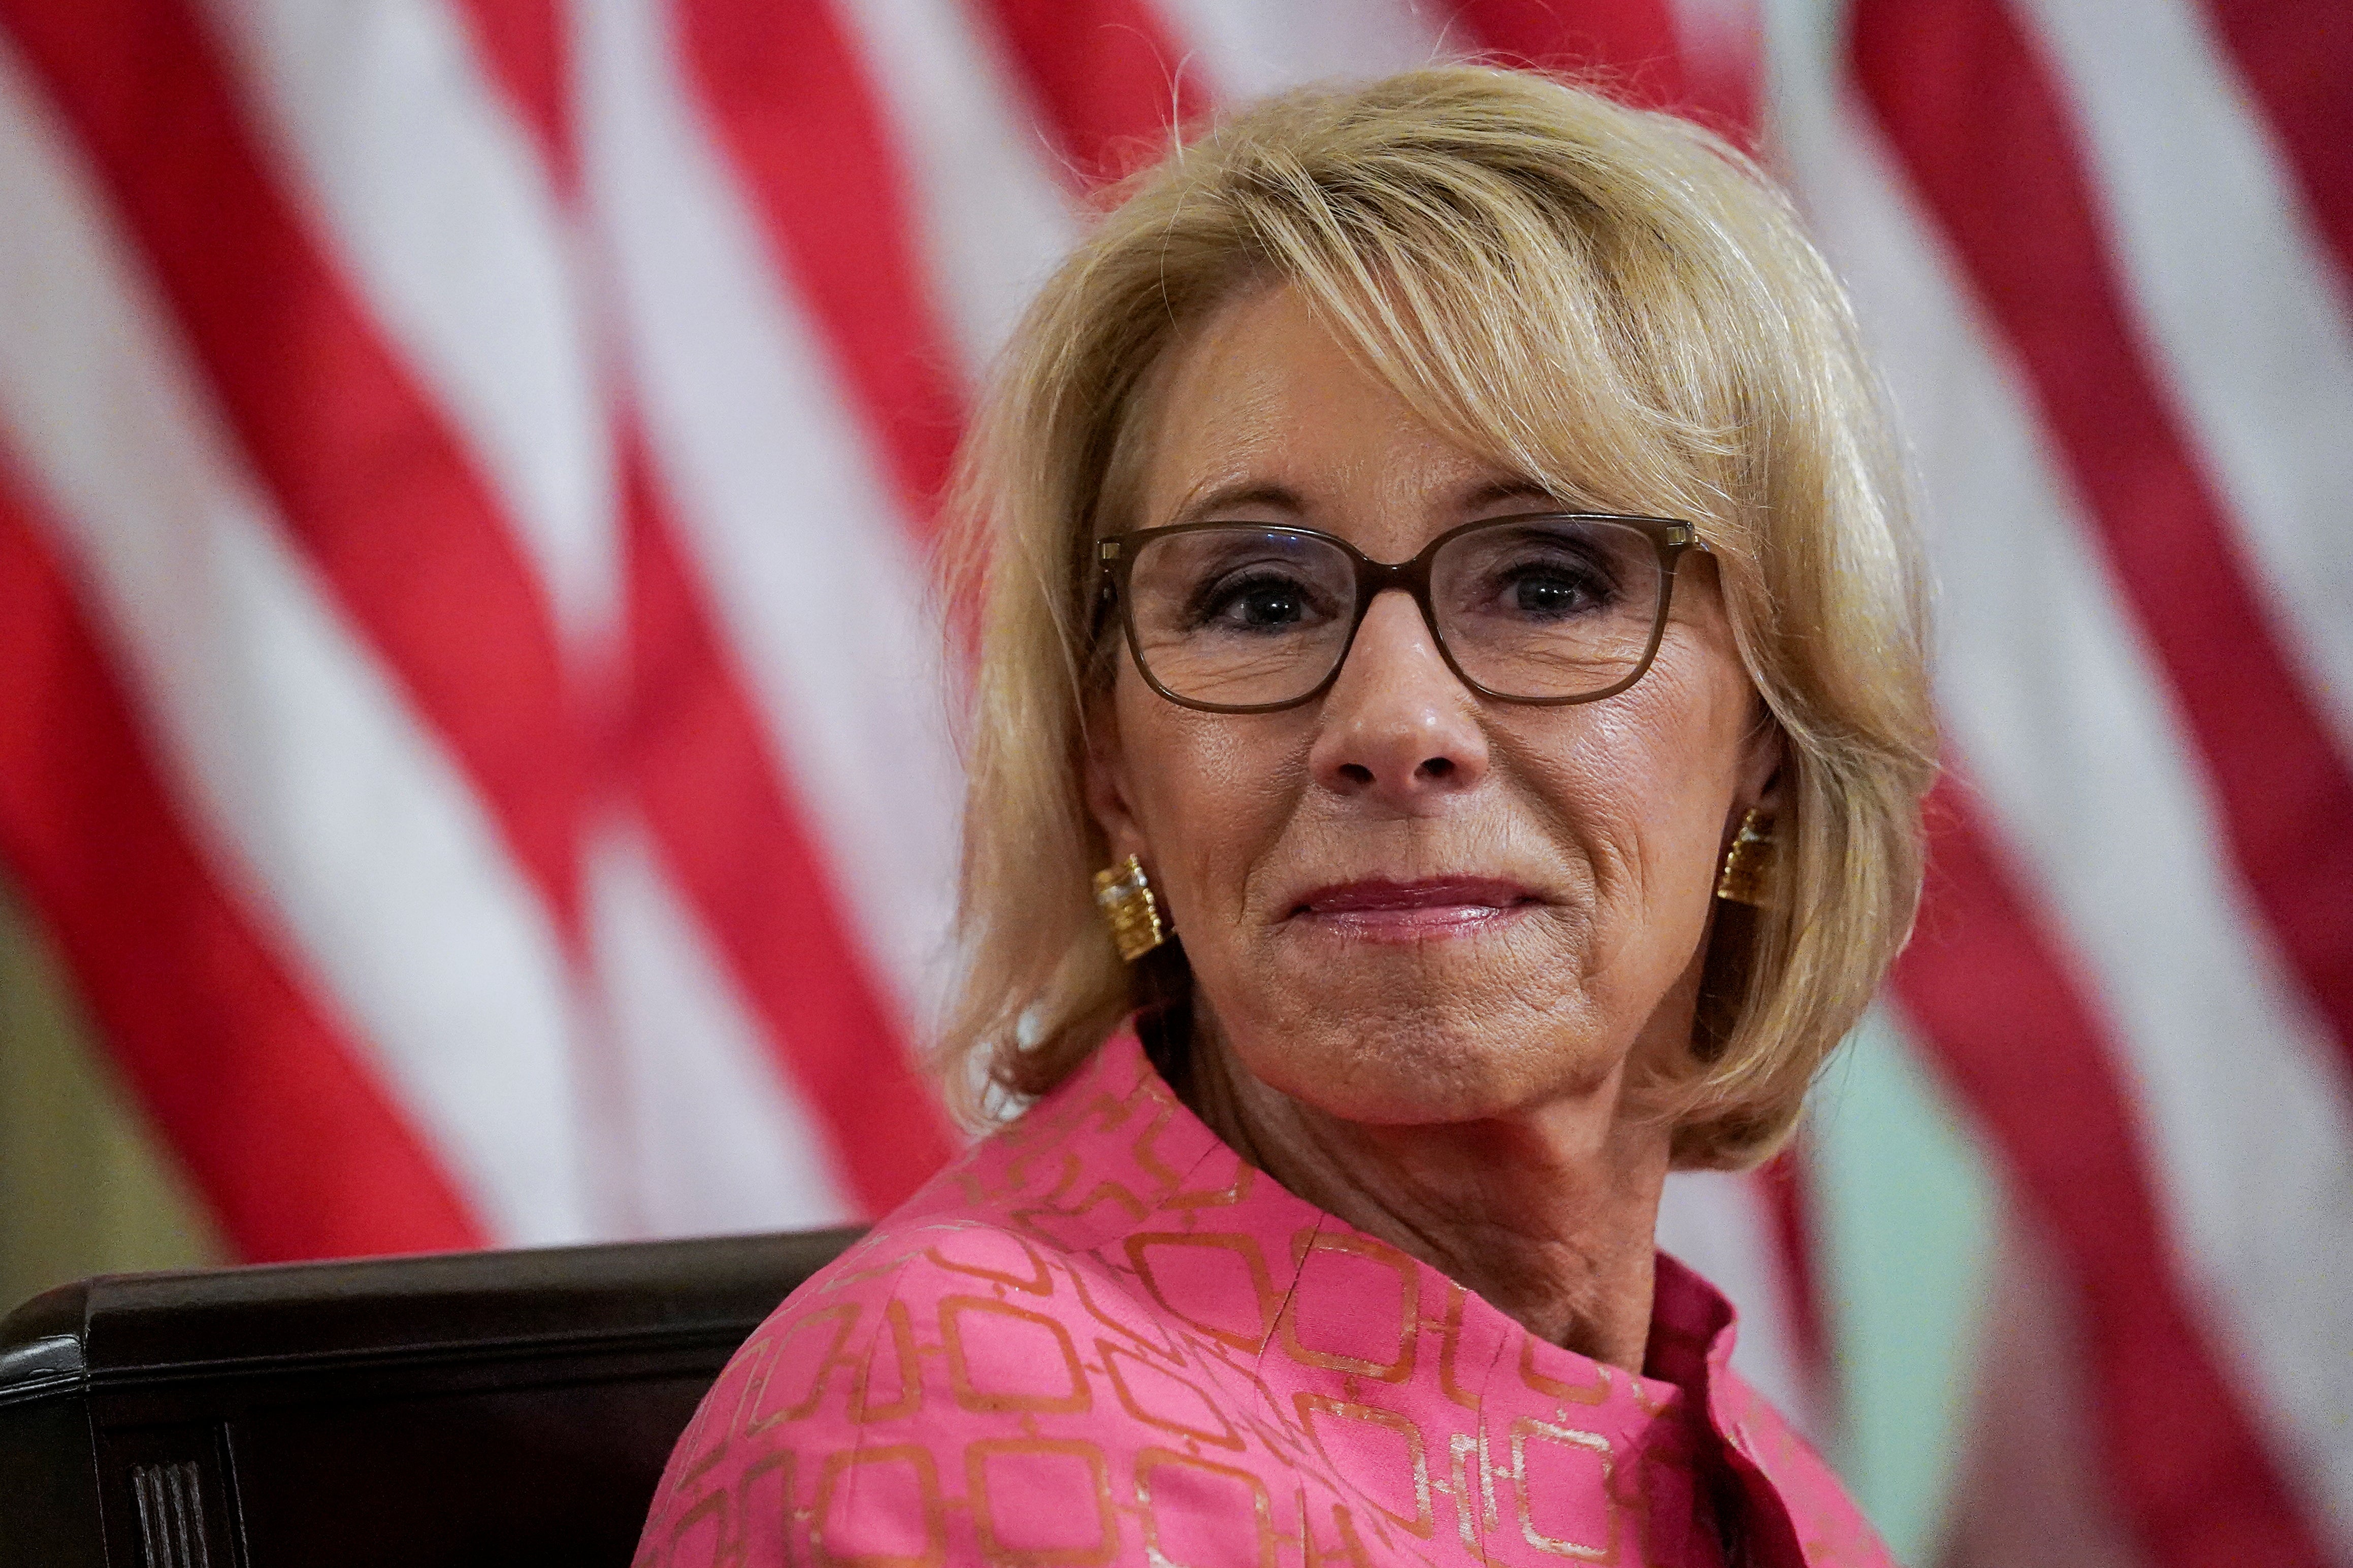 File image: Outgoing education secretary heard asking department to resist Biden administration